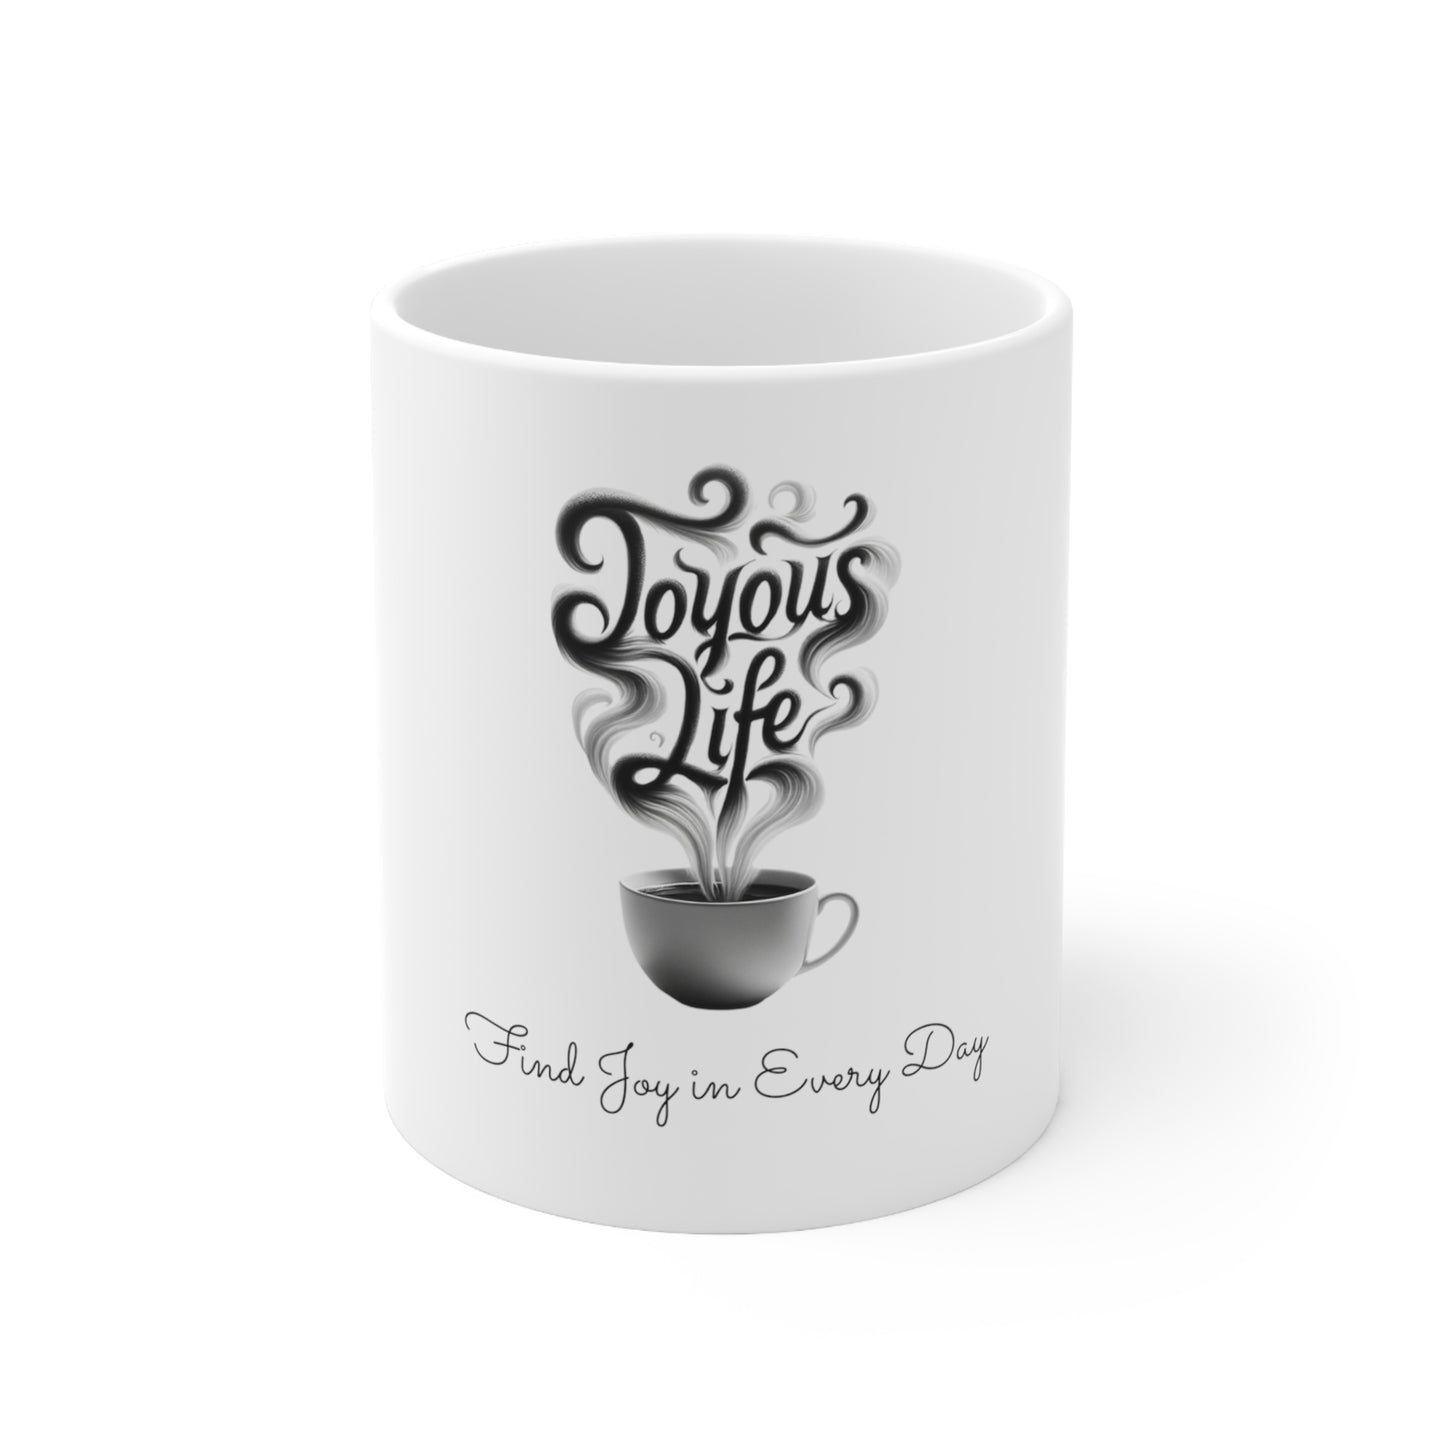 Find Joy in Every Day Mug: A Daily Dose of Happiness, 11oz, Joyous Life Journals